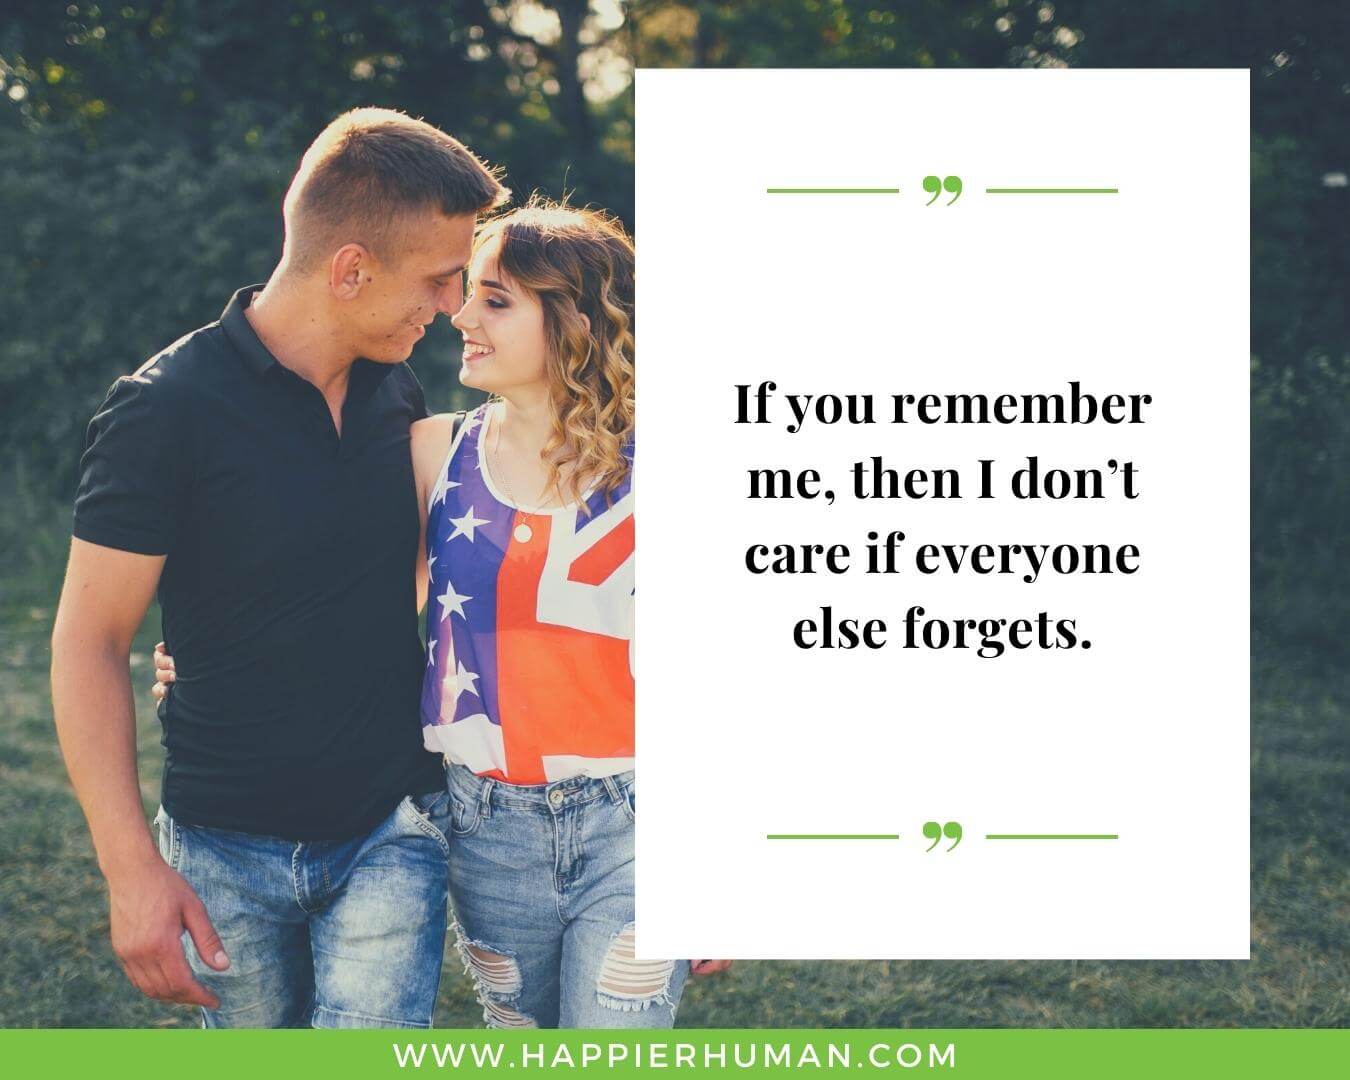 Unconditional Love Quotes for Her - “If you remember me, then I don’t care if everyone else forgets.”